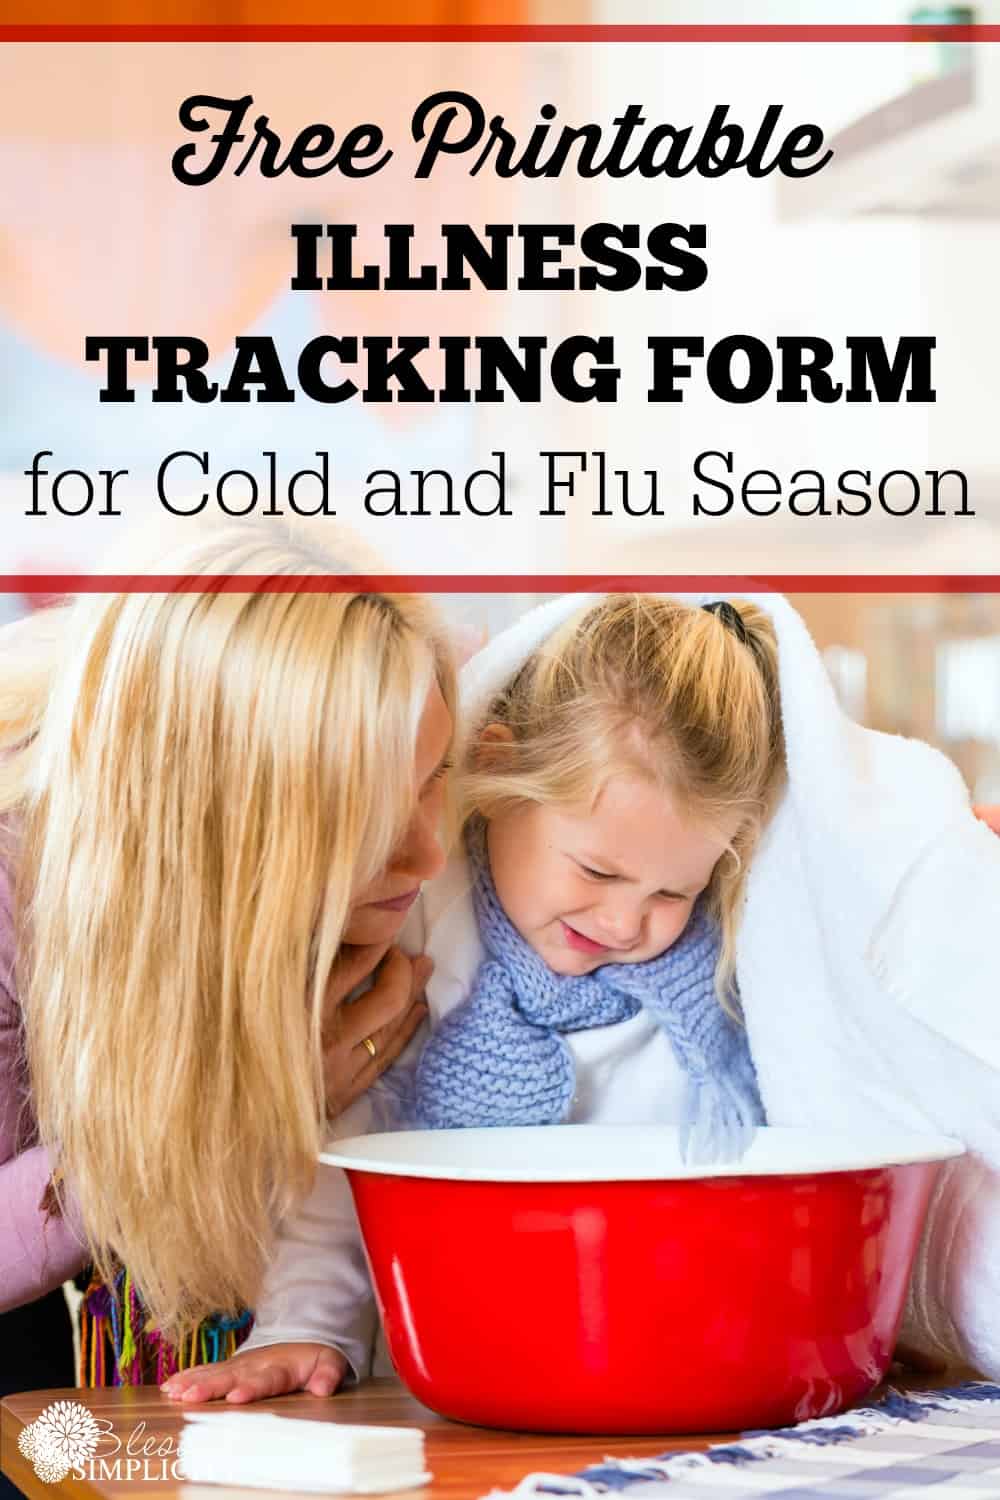 Track symptoms of illness from the beginning and give the most helpful information to your doctor with this illness tracking form.  When cold and flu season sets in, these are great tips for surviving and staying healthy with kids.